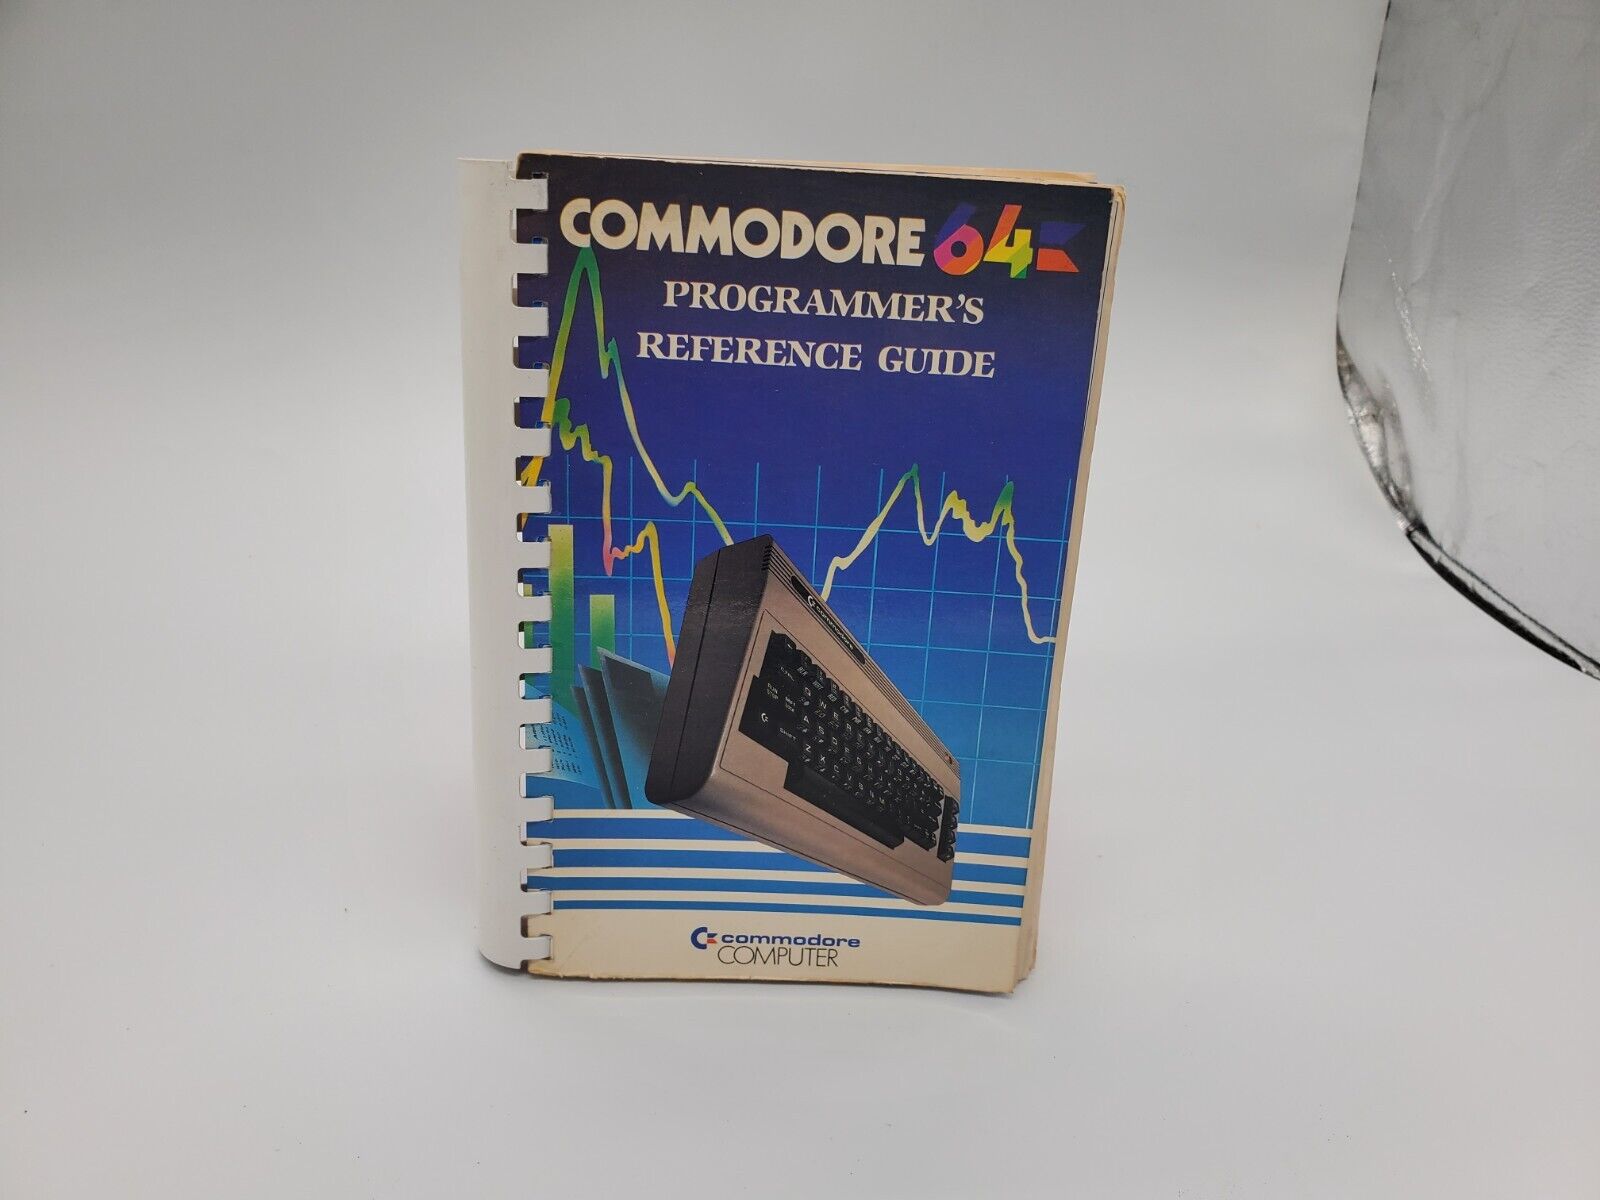 Commodore 64: Programmer's Reference Guide Plastic Comb 1st Ed 4th Printing